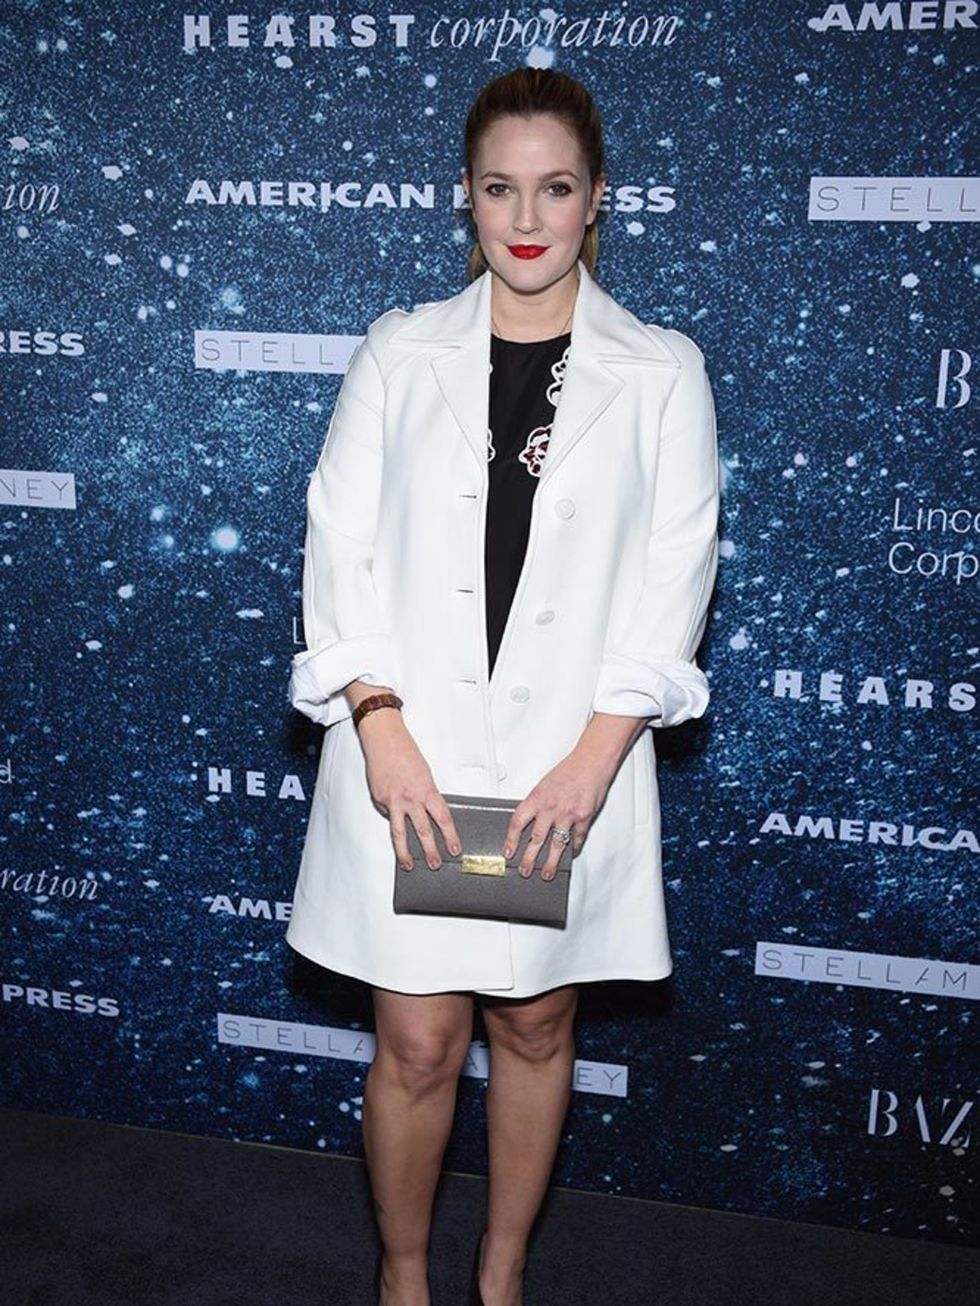 Drew Barrymore attends a fashion party in New York, November 2014